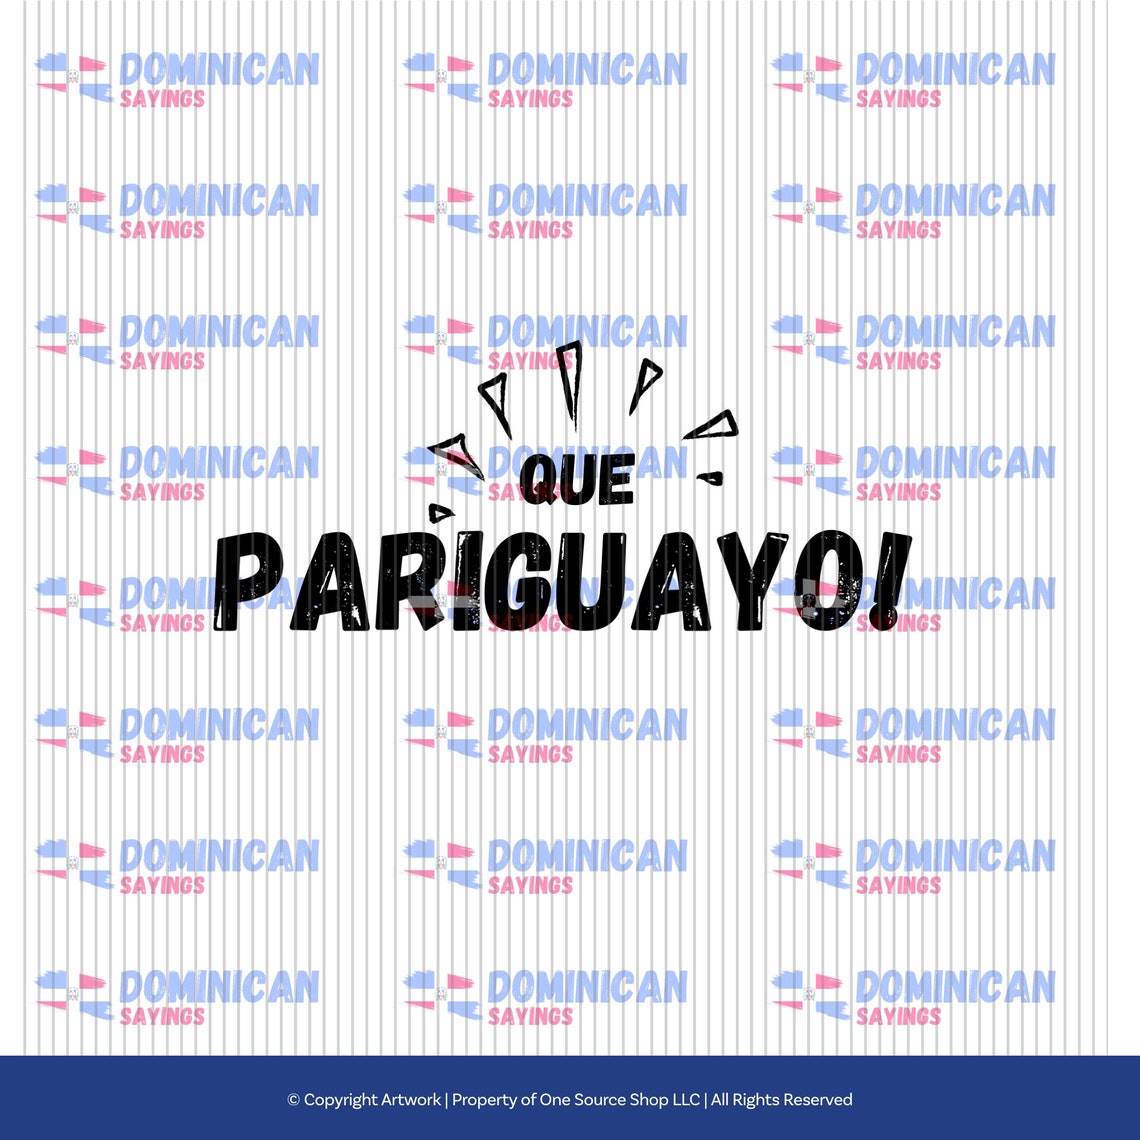 Dominican Sayings Png And Svg Files Frases Dominicanas Etsy